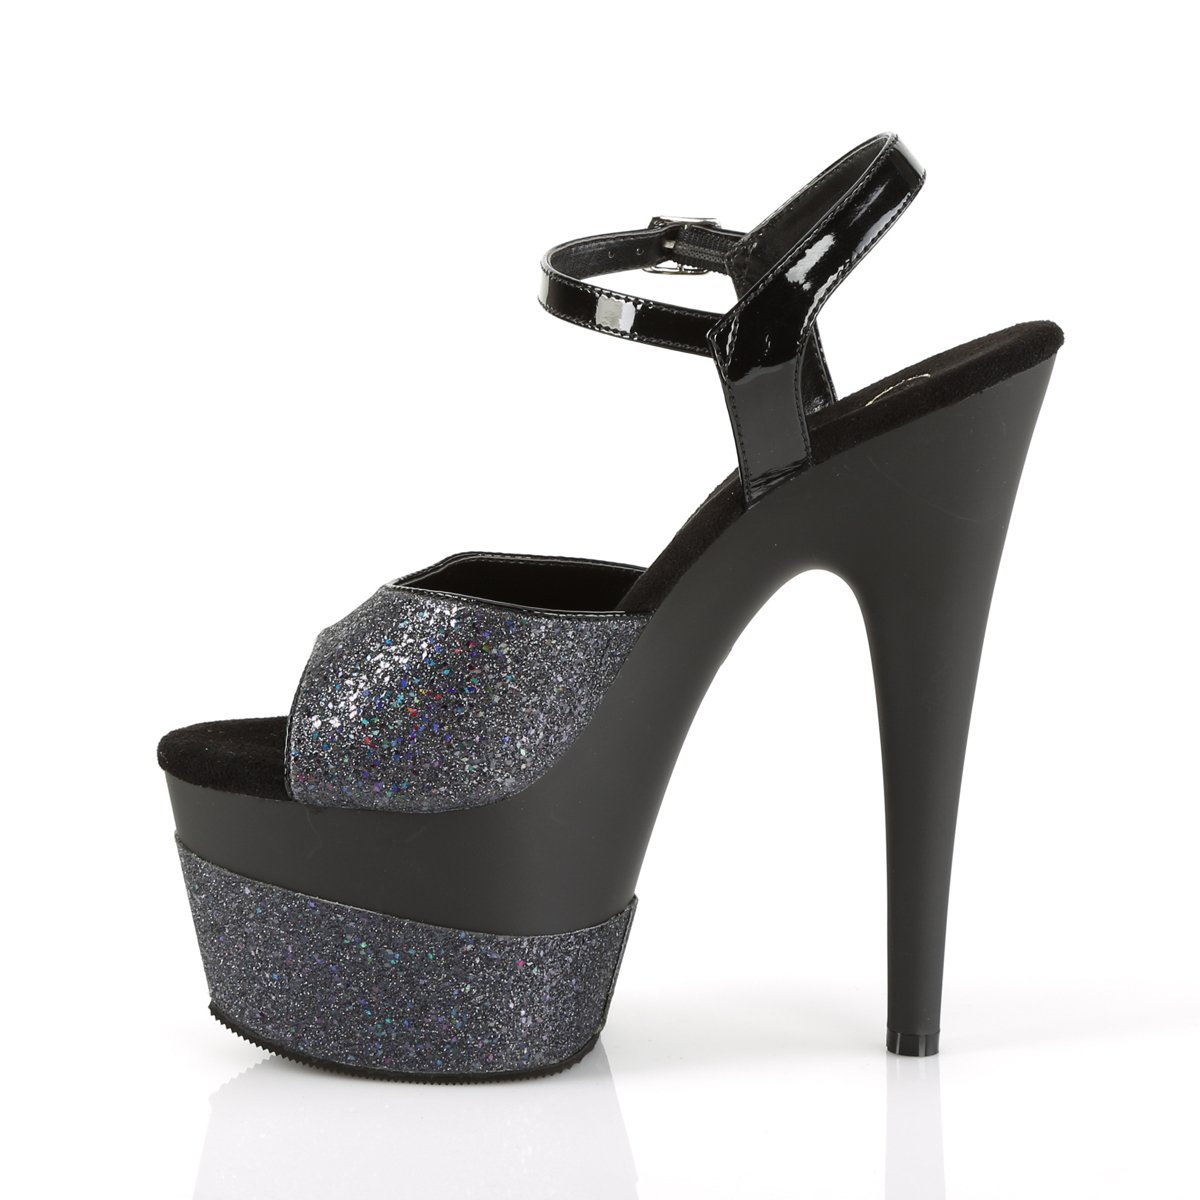 Pleaser Adore-709-2G Platforms | Buy Sexy Shoes at Shoefreaks.ca